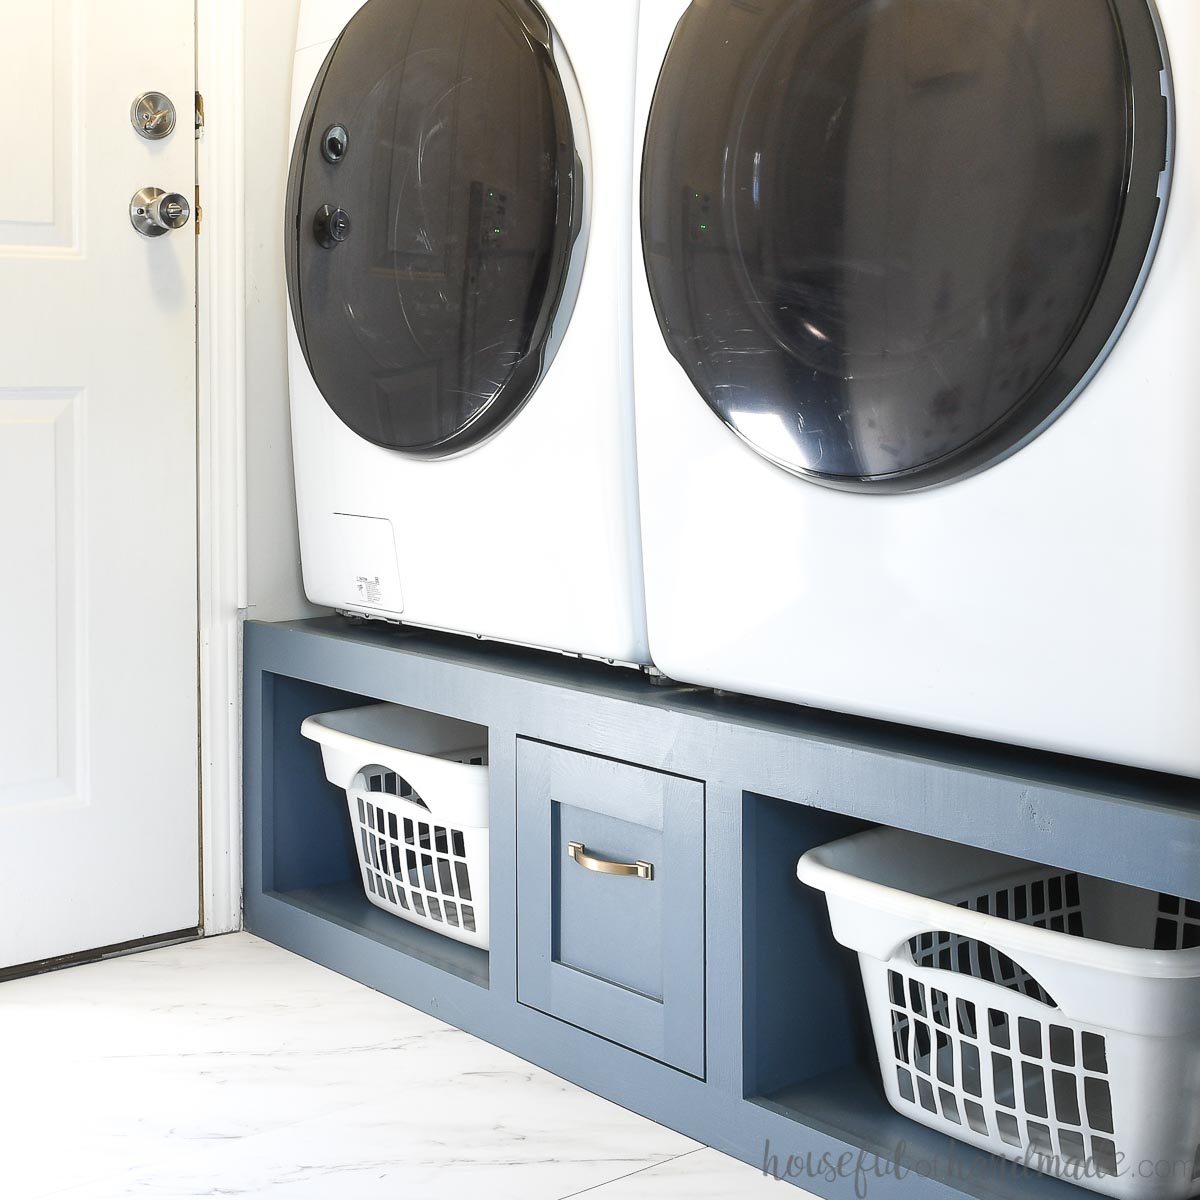 Navy blue washer dryer platform with a drawer in the center of two shelves to hold laundry baskets.